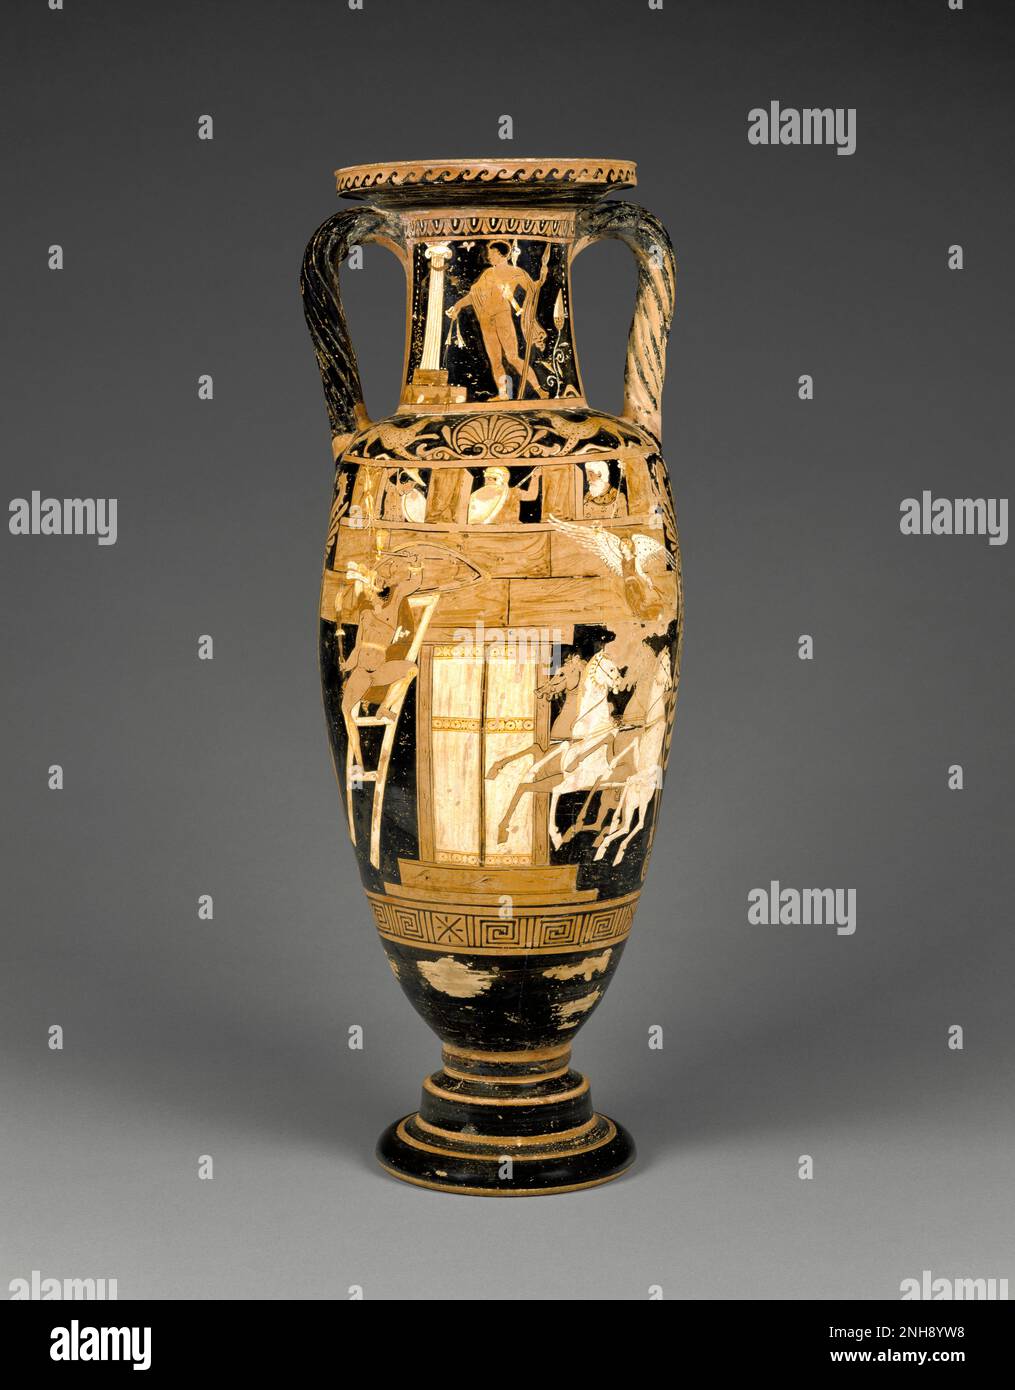 Campanian Neck-Amphora; Attributed to Caivano Painter (Greek, active 340 - 330 B.C.); about 340 B.C. This shows an episode from the story of The Seven Against Thebes, when a group of heroes attacked the Greek city to reinstate the rightful king. Holding a burning torch, the hero Kapaneus climbs a ladder, while two defenders and the usurping ruler look down from the wall. Kapaneus was killed for claiming that he did not need the gods' help; at top left, Zeus's thunderbolt falls towards the warrior. Stock Photo